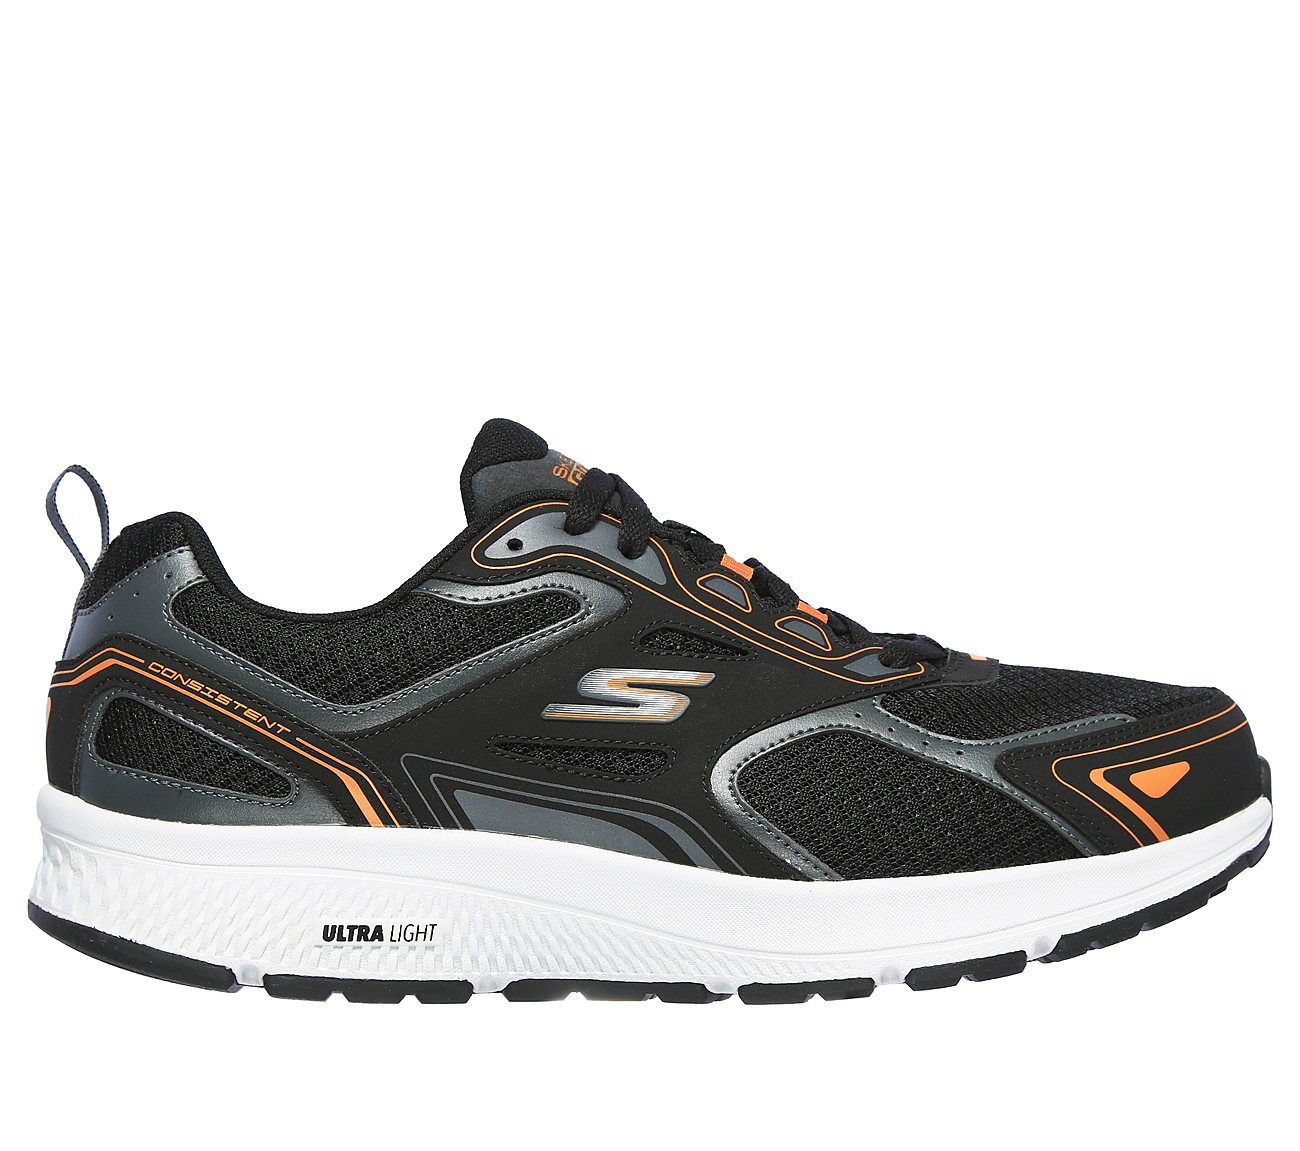 Skechers Air Cooled Wide Fit Online, SAVE 55%